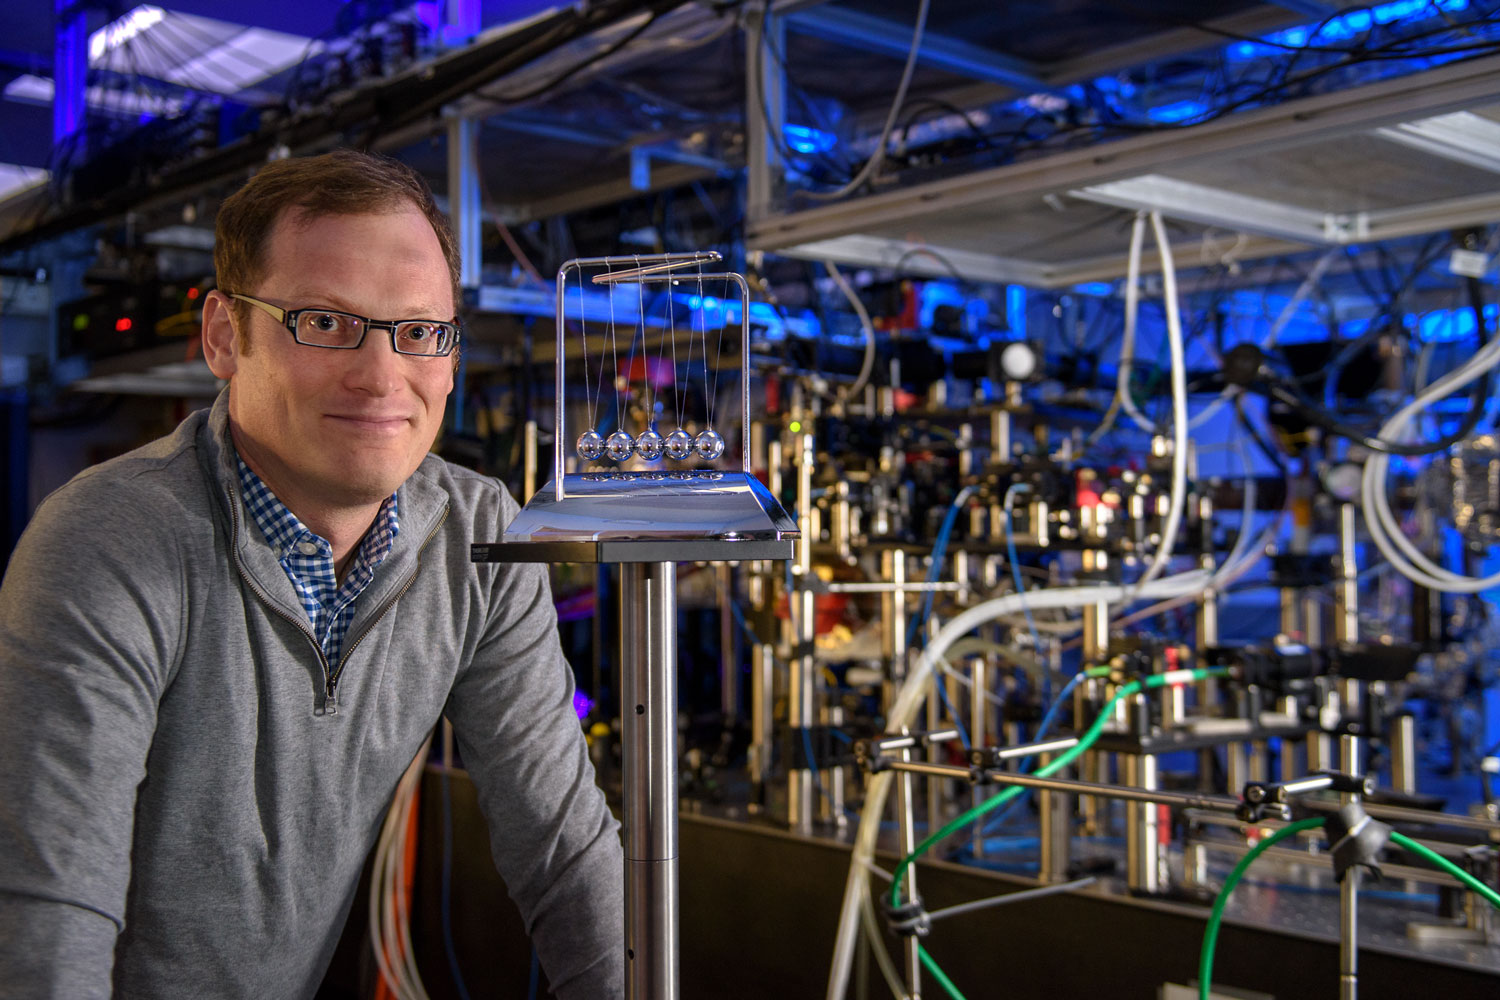 Associate Professor Benjamin Lev and his research team were inspired by the toy known as Newton’s cradle in their investigation of quantum systems